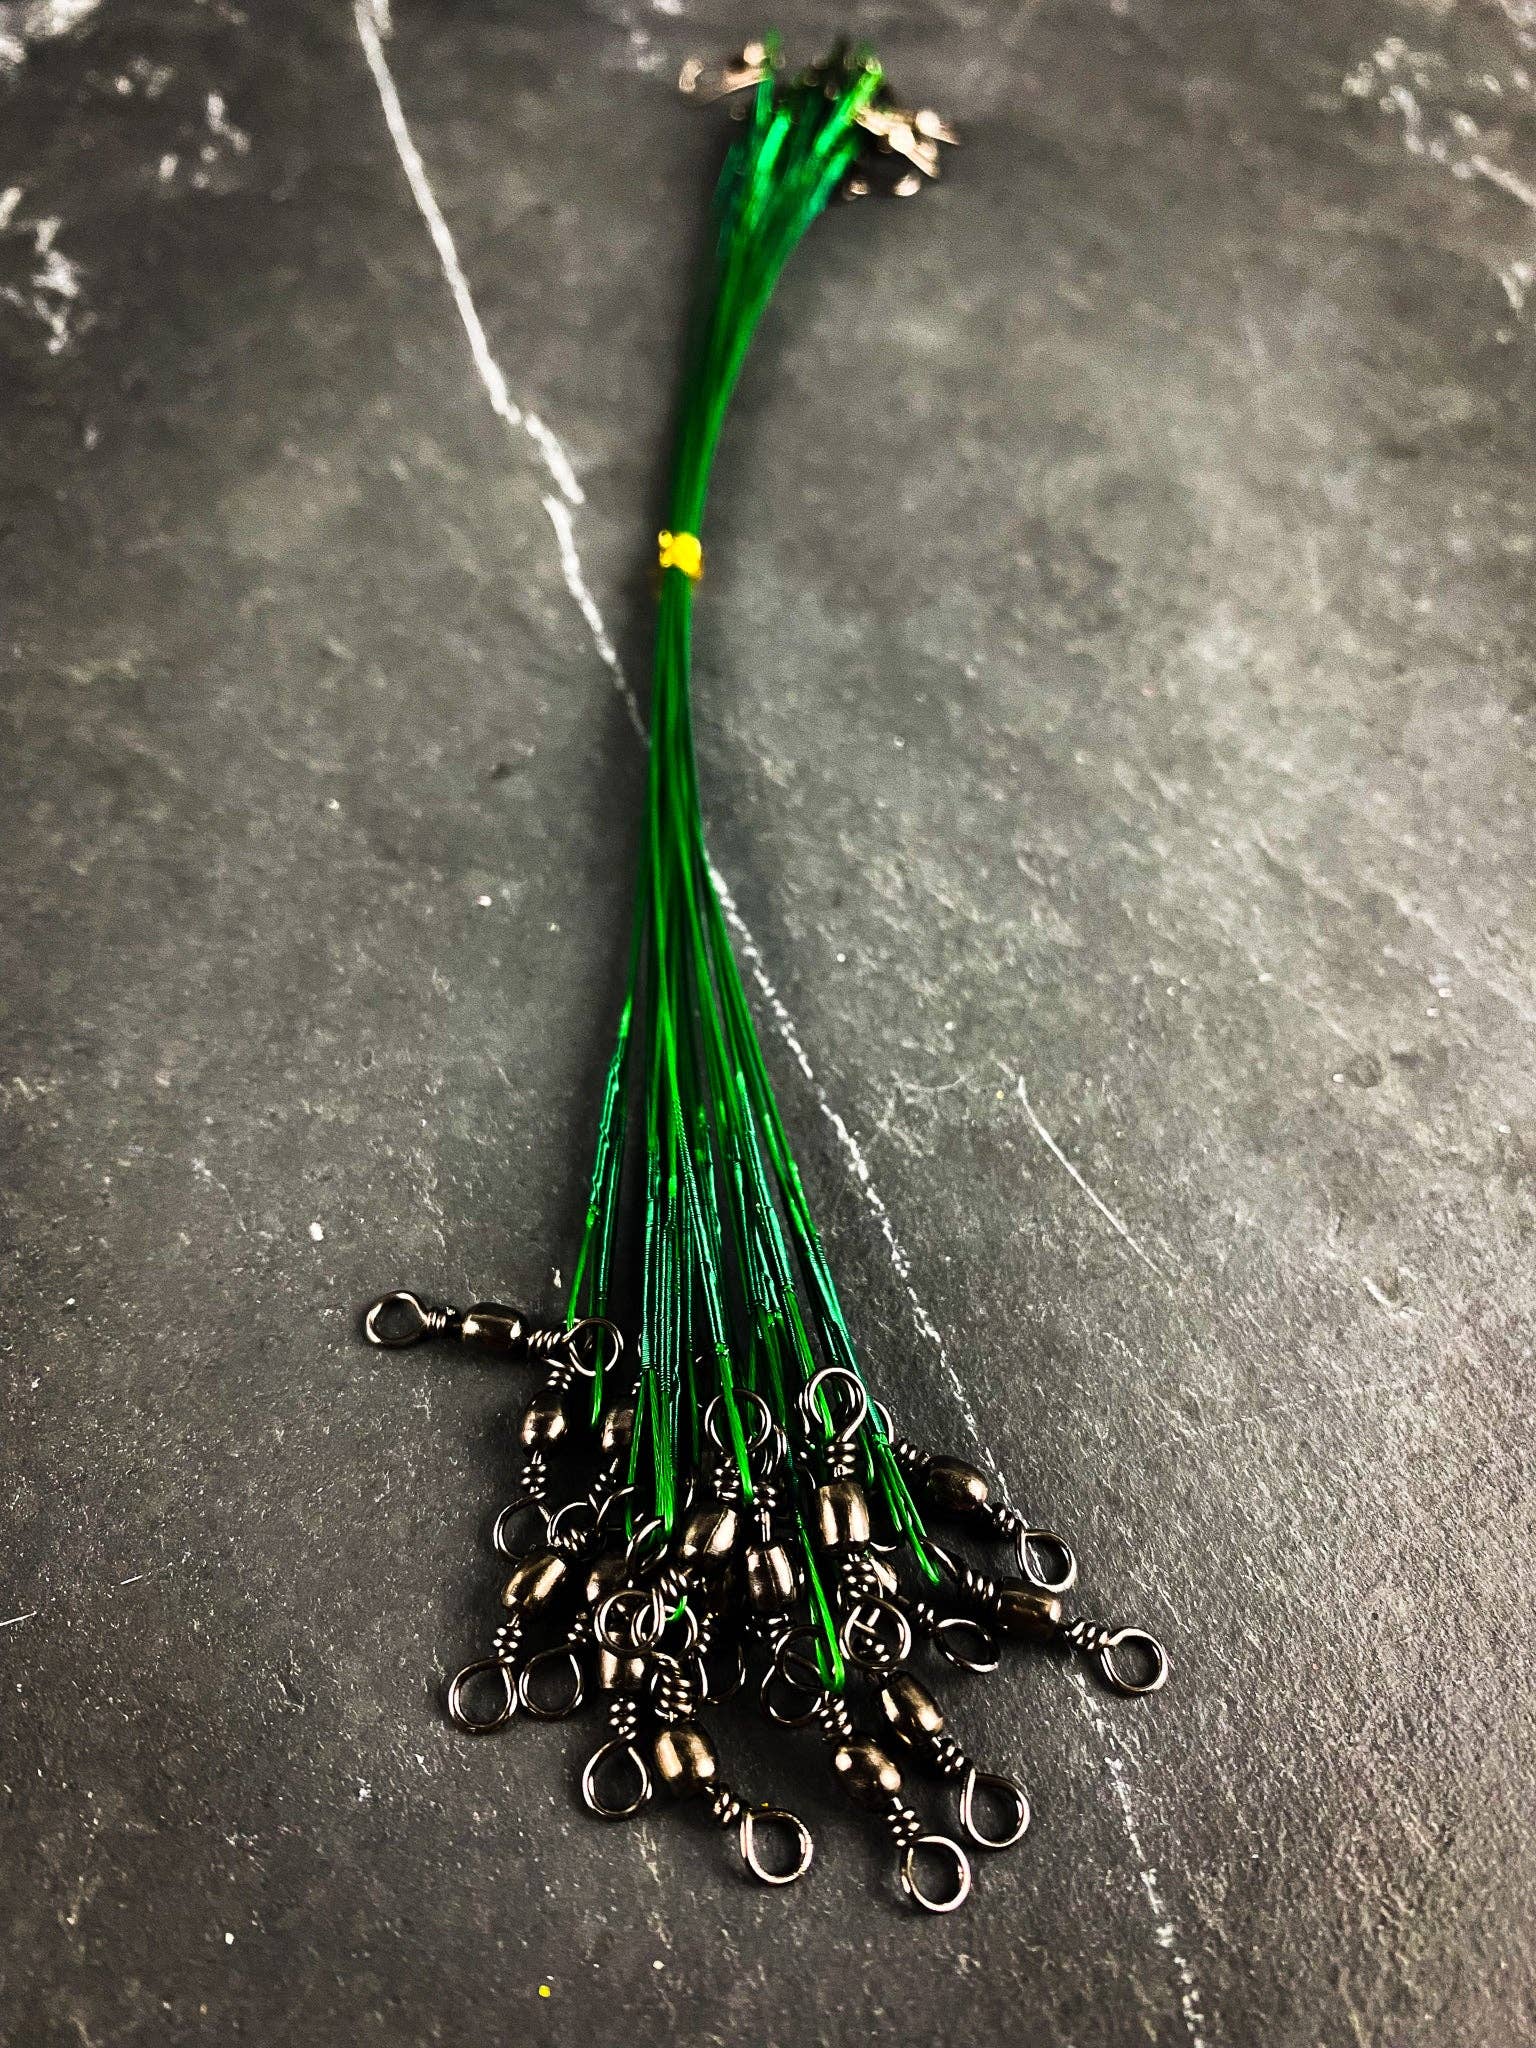 Wholesale (20) Green Steel Wire 30lb Swivel Fishing Leaders for your store  - Faire Canada